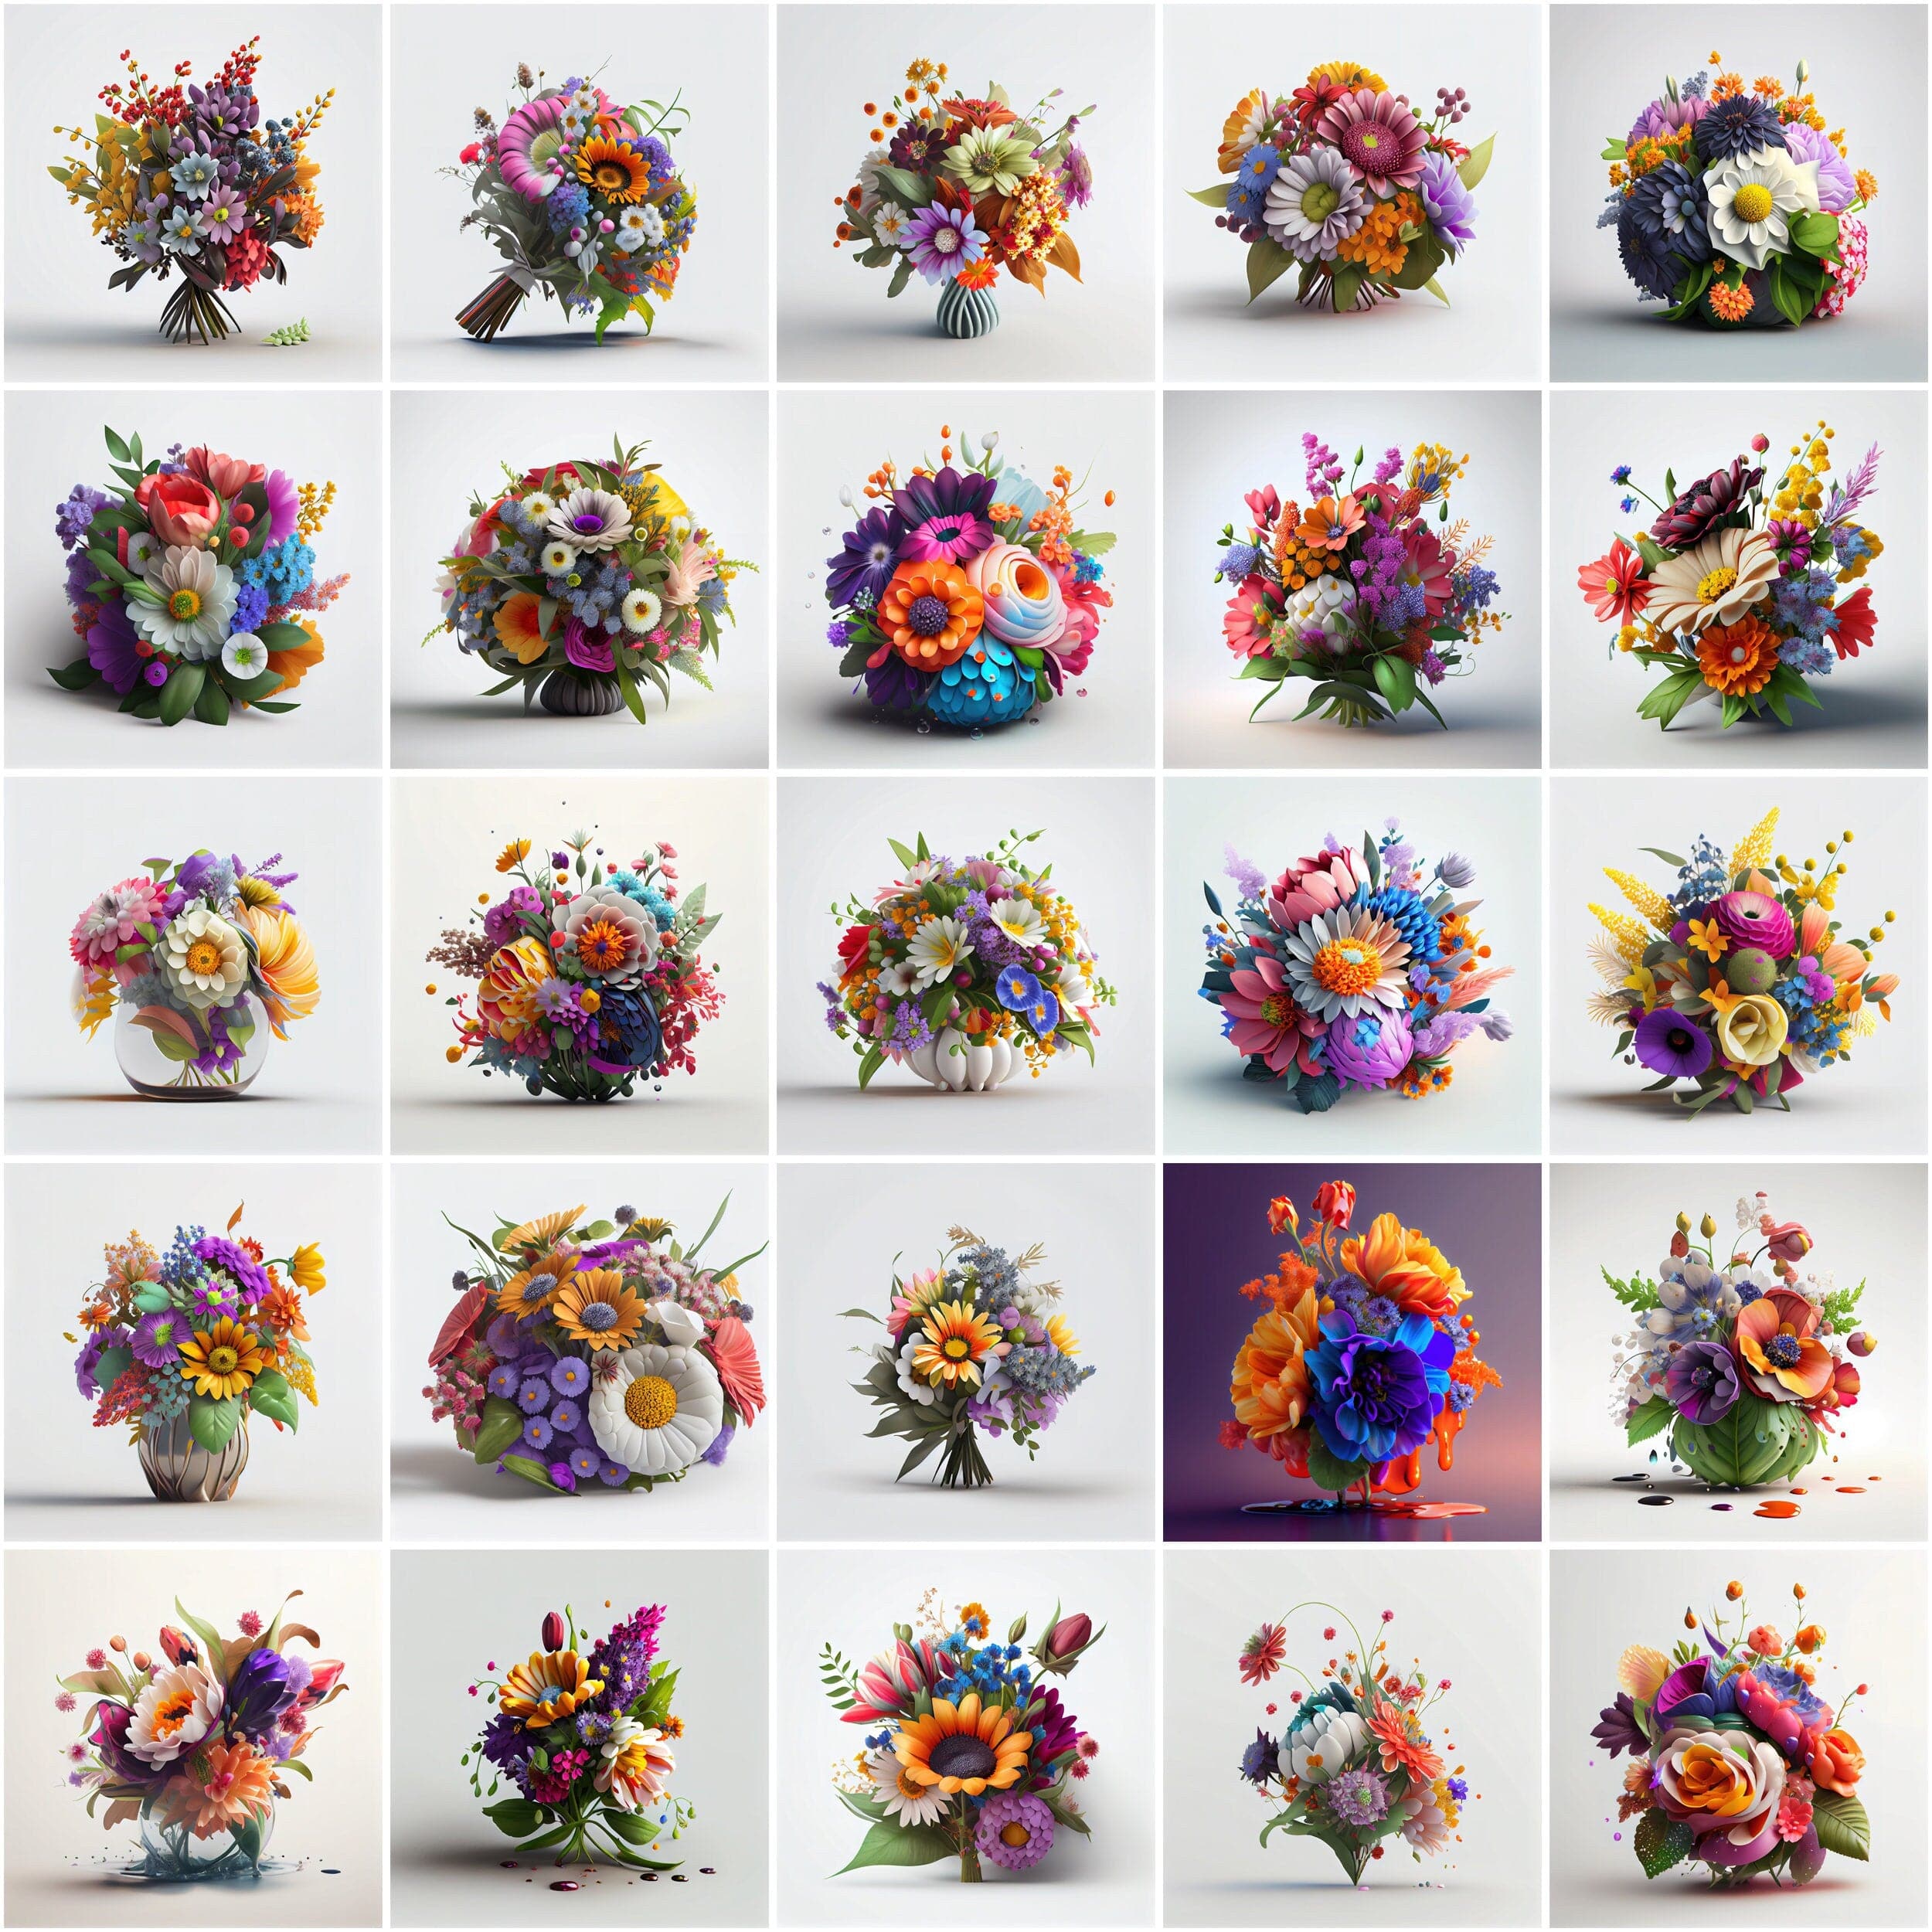 Blooming Beauty: 340 Stunning Bouquet Images - Add a Touch of Elegance to Your Designs with Our High-Resolution Image Bundle Digital Download Sumobundle